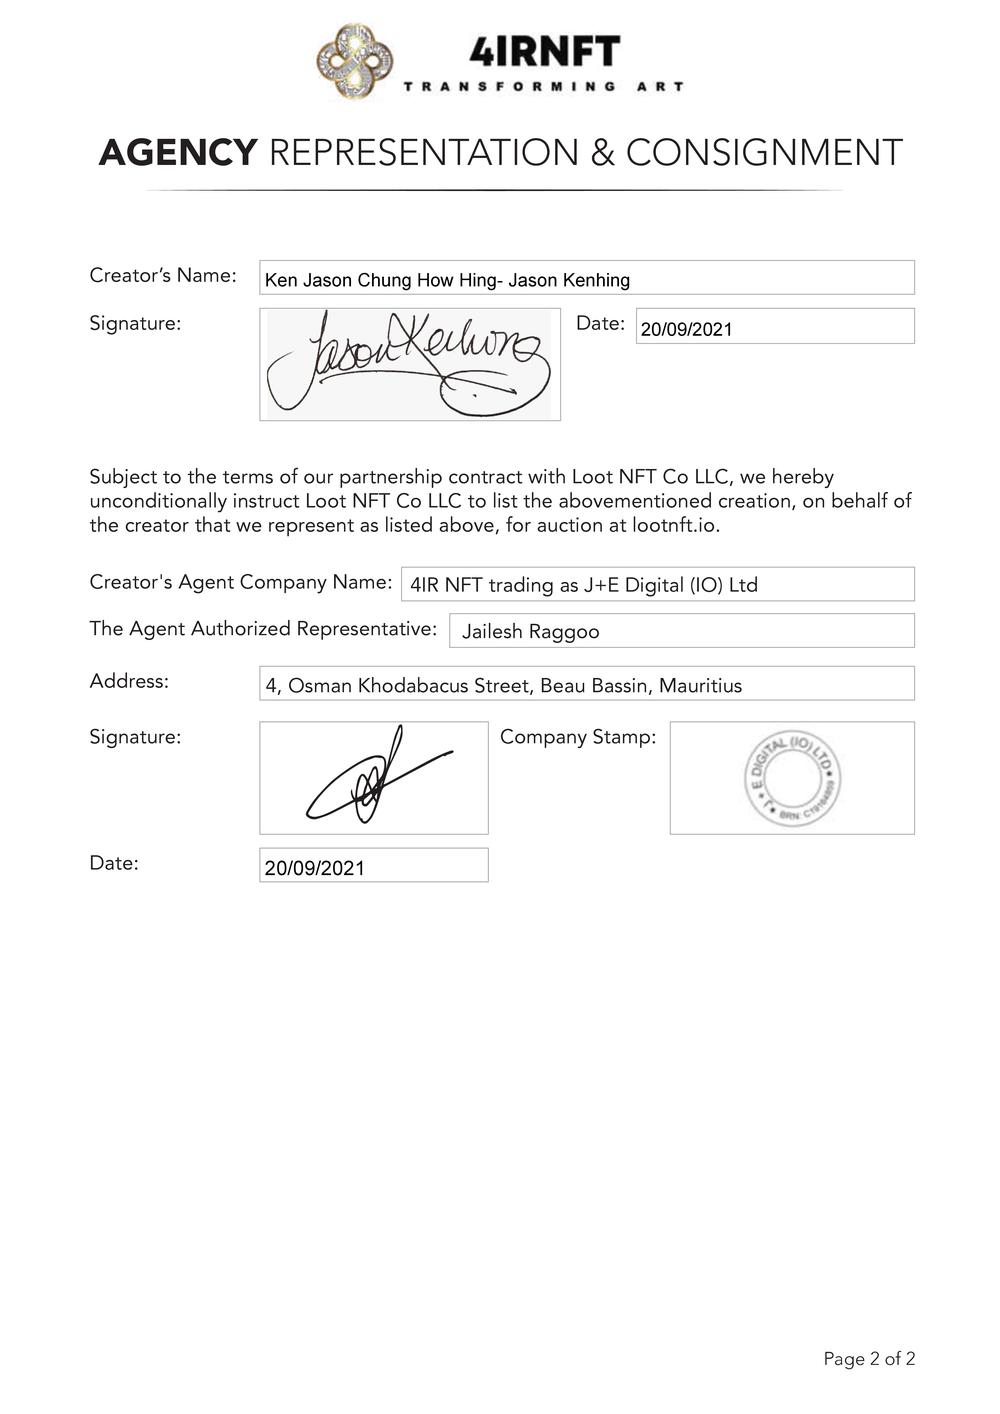 Certificate of Authenticity and Consignment - Past Present Future.pdf